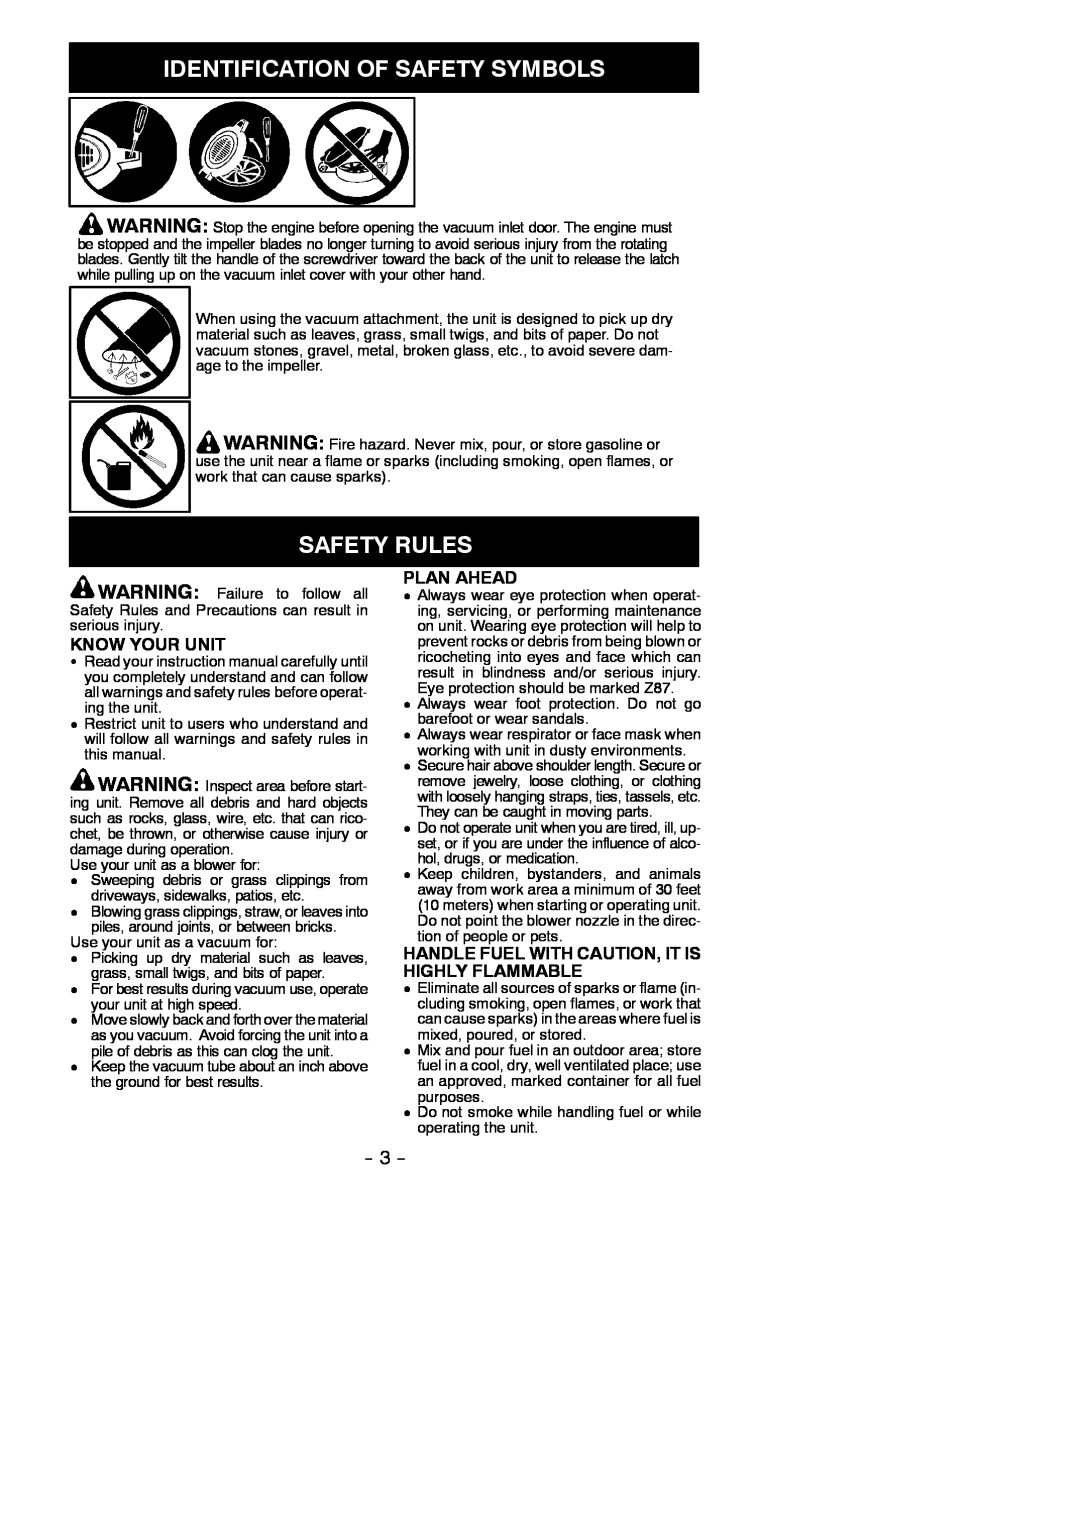 Poulan 545137216 instruction manual Safety Rules, Identification Of Safety Symbols, Know Your Unit, Plan Ahead 